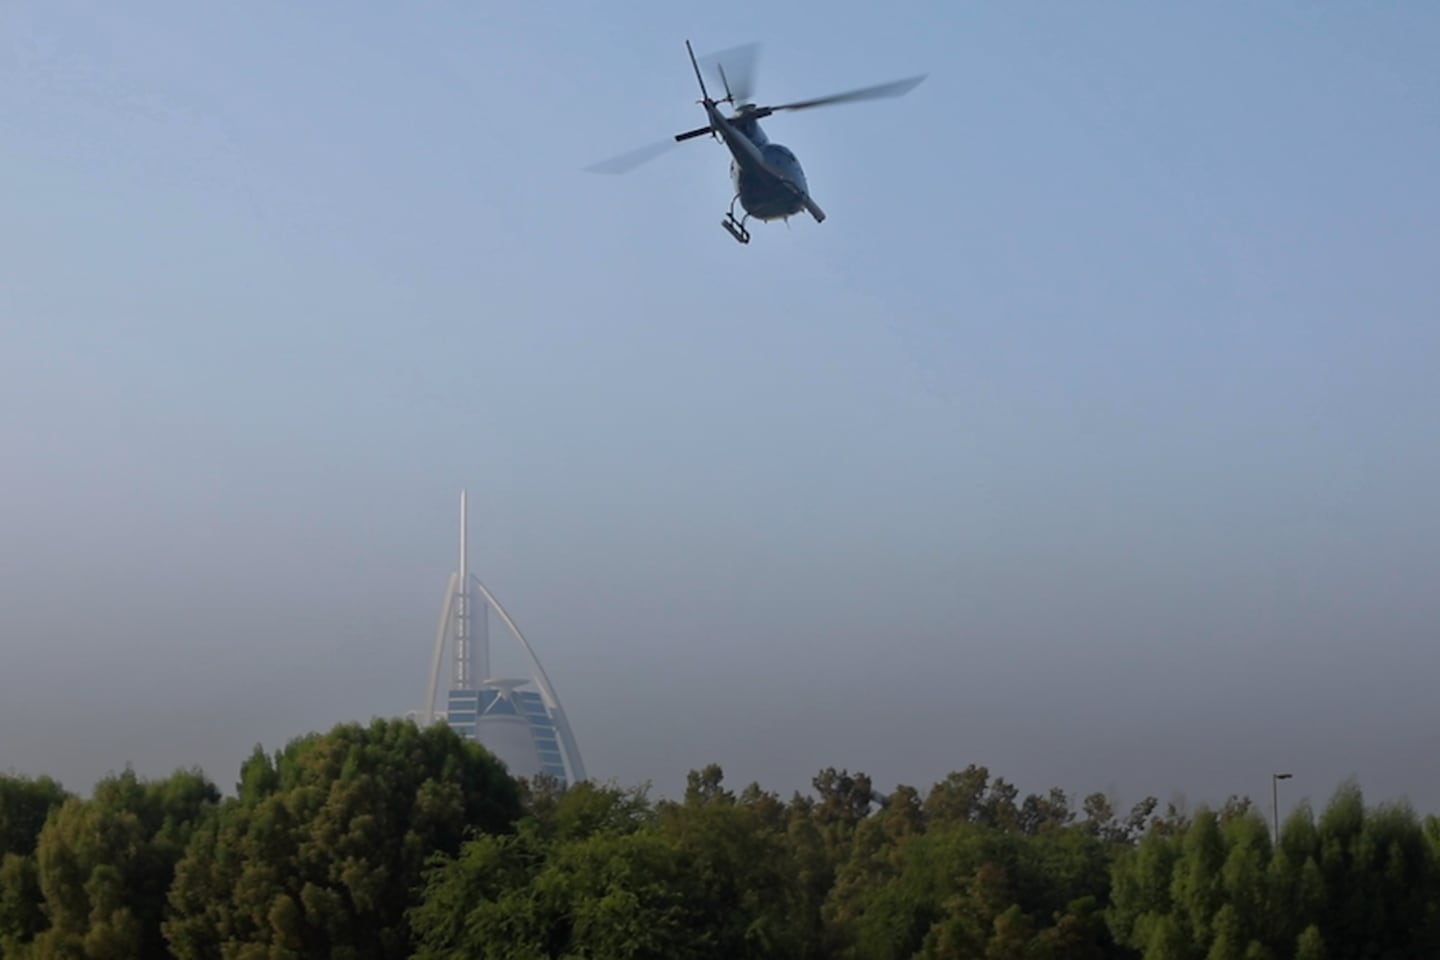 Property prices in the UAE so high you need a helicopter to visit